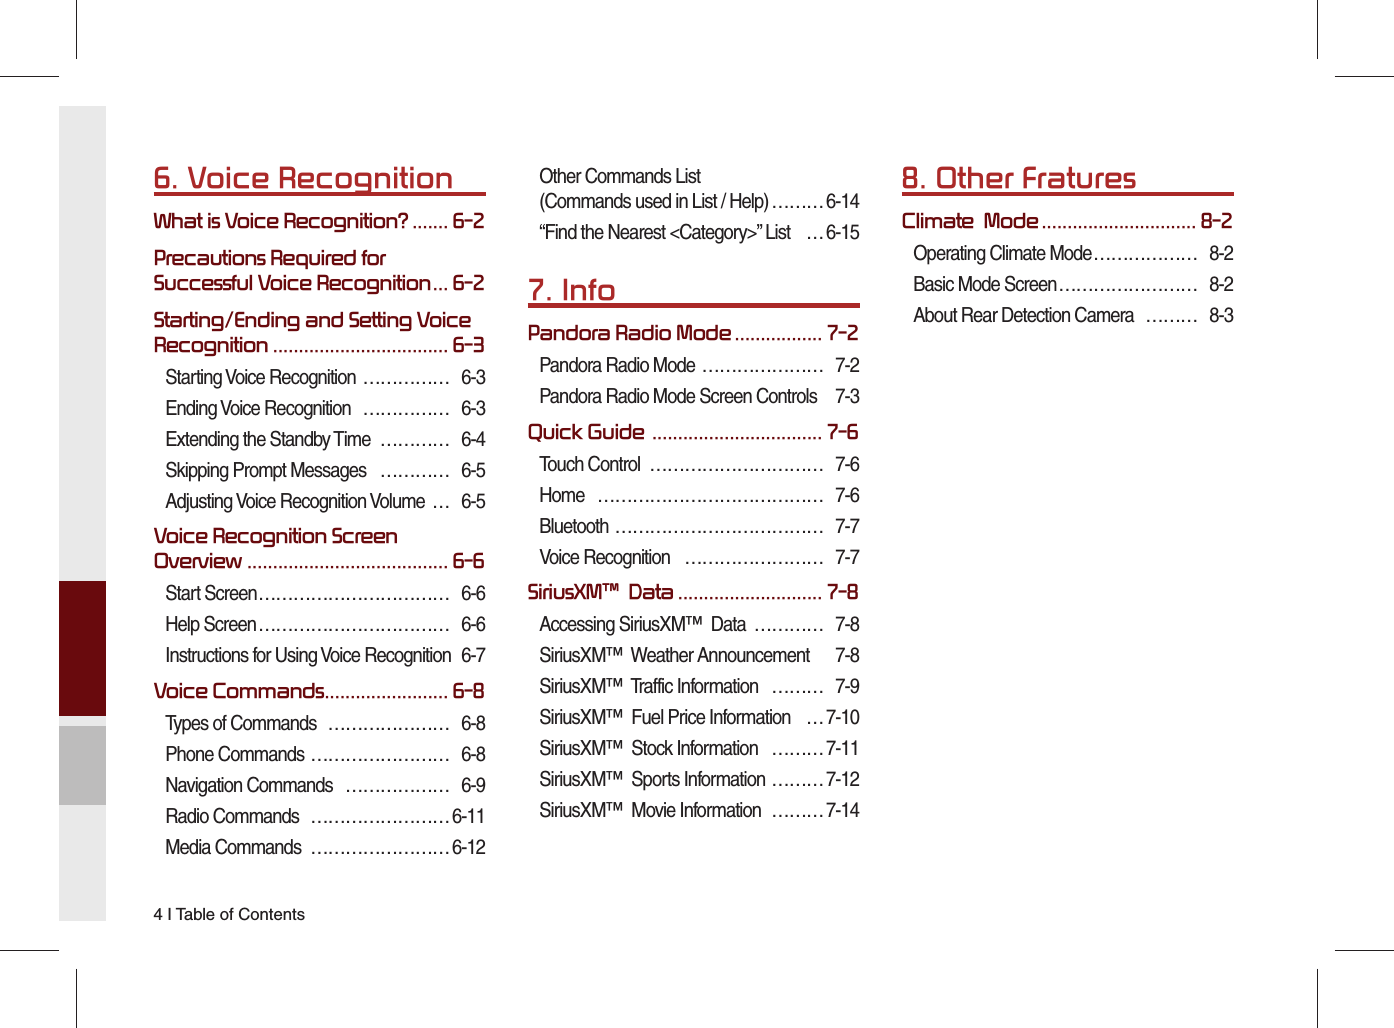 4 I Table of Contents6. Voice RecognitionWhat is Voice Recognition? ....... 6-2Precautions Required for Successful Voice Recognition ... 6-2Starting/Ending and Setting Voice Recognition .................................. 6-3Starting Voice Recognition  …………… 6-3Ending Voice Recognition  …………… 6-3Extending the Standby Time  ………… 6-4Skipping Prompt Messages   ………… 6-5Adjusting Voice Recognition Volume  … 6-5Voice Recognition Screen Overview ....................................... 6-6Start Screen …………………………… 6-6Help Screen …………………………… 6-6Instructions for Using Voice Recognition  6-7Voice Commands ........................ 6-8Types of Commands  ………………… 6-8Phone Commands …………………… 6-8Navigation Commands  ……………… 6-9Radio Commands  …………………… 6-11Media Commands  …………………… 6-12Other Commands List(Commands used in List / Help) ……… 6-14“Find the Nearest &lt;Category&gt;” List  … 6-157. InfoPandora Radio Mode ................. 7-2Pandora Radio Mode  ………………… 7-2Pandora Radio Mode Screen Controls  7-3Quick Guide  ................................. 7-6Touch Control  ………………………… 7-6Home ………………………………… 7-6Bluetooth ……………………………… 7-7Voice Recognition   …………………… 7-7SiriusXM™  Data ............................ 7-8Accessing SiriusXM™  Data  ………… 7-8SiriusXM™  Weather Announcement  7-8SiriusXM™  Traffic Information  ……… 7-9SiriusXM™  Fuel Price Information  … 7-10SiriusXM™  Stock Information  ……… 7-11SiriusXM™  Sports Information  ……… 7-12SiriusXM™  Movie Information  ……… 7-148. Other FraturesClimate  Mode .............................. 8-2Operating Climate Mode ……………… 8-2Basic Mode Screen …………………… 8-2About Rear Detection Camera  ……… 8-3